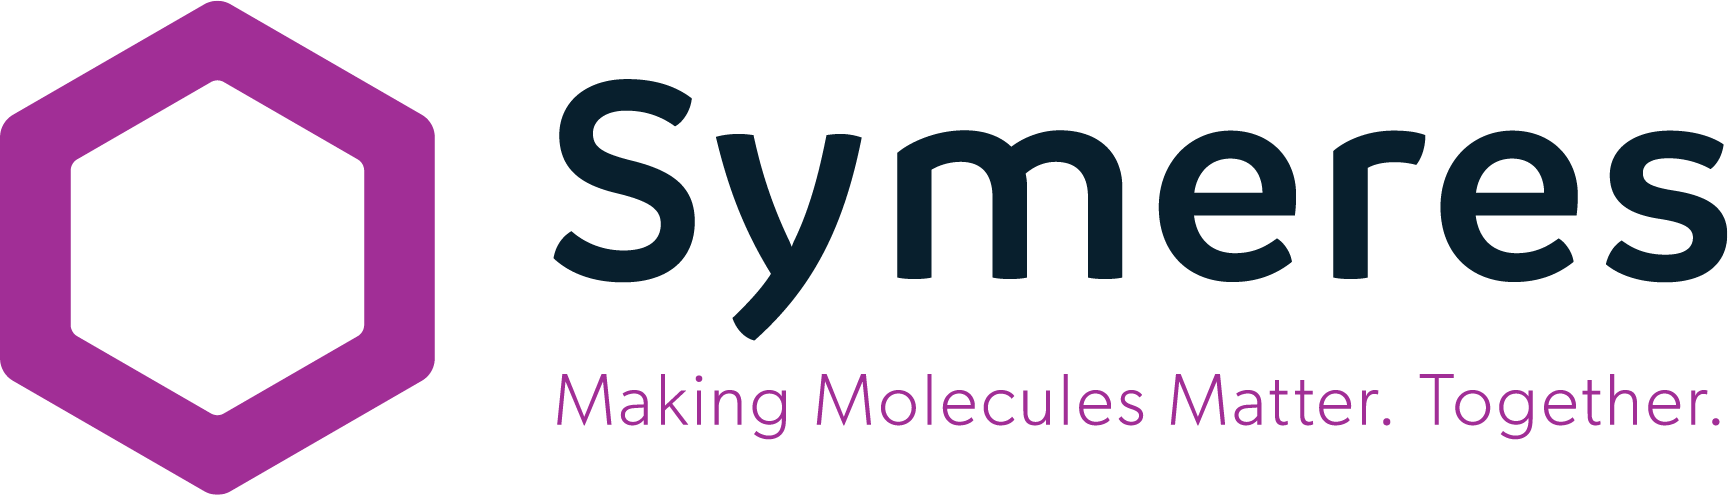 Symeres purple and black logo with strapline Making Molecules Matter. Together